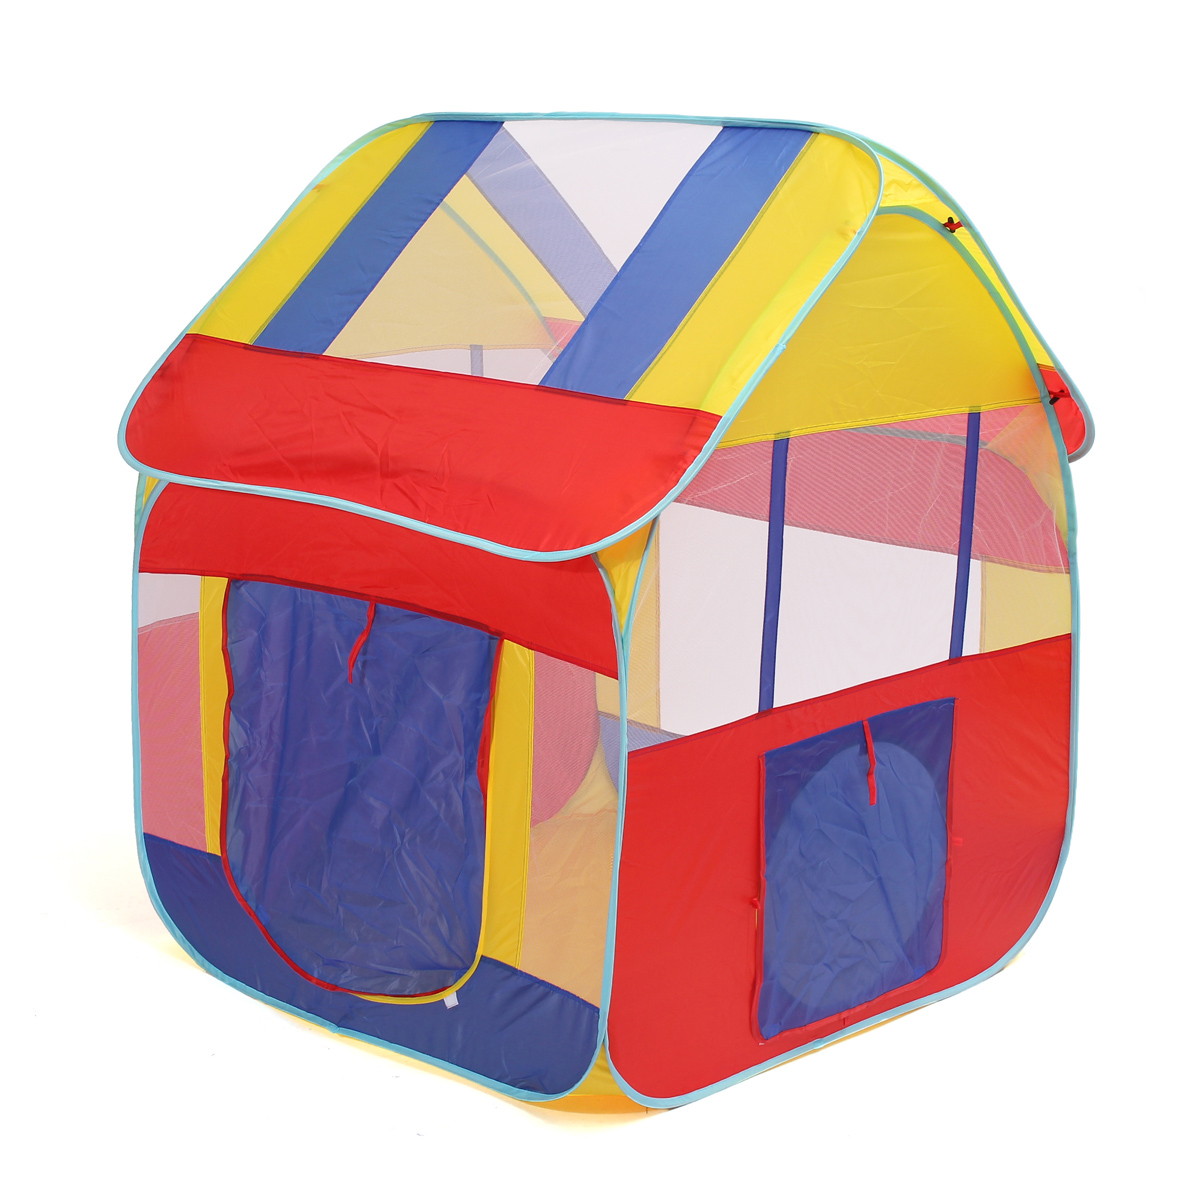 12m-Pop-Up-Tent-Indoor-Outdoor-Playground-Ball-Pit-Play-House-Hut-Fun-Game-Kids-Toy-1125171